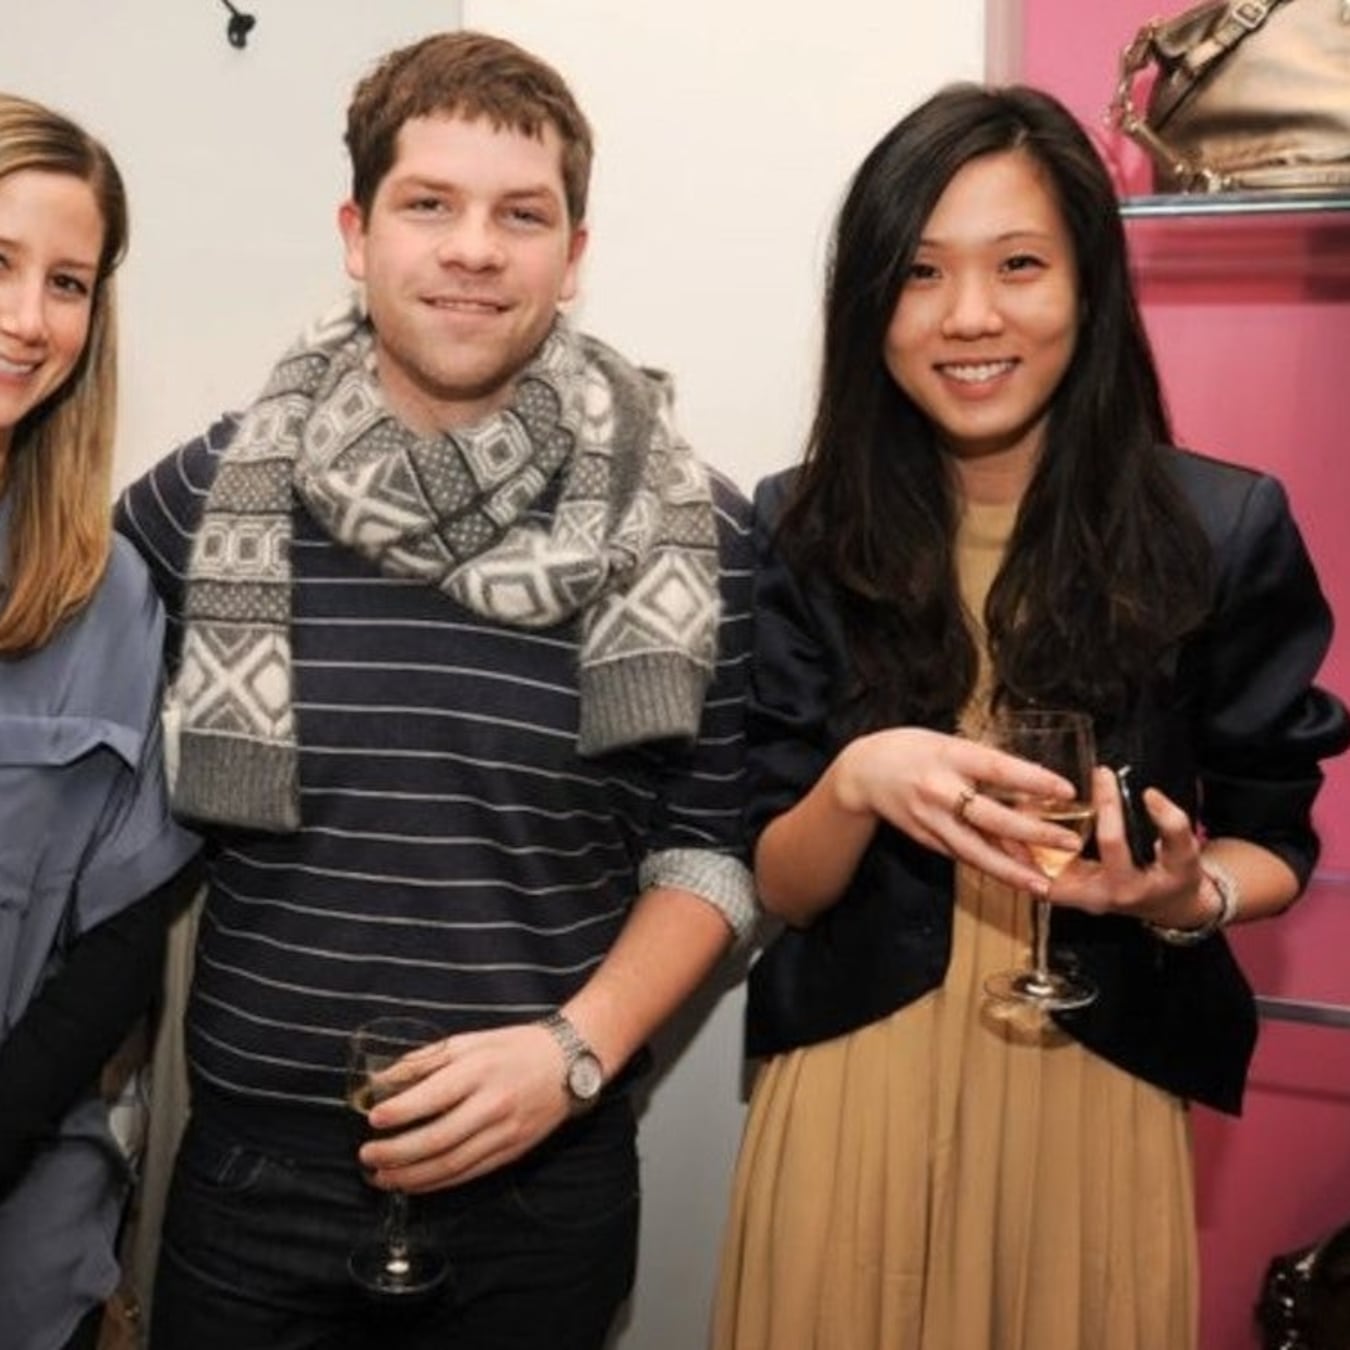 Project-Matchbook Magazine launch party at Coach Soho, 2/2/11